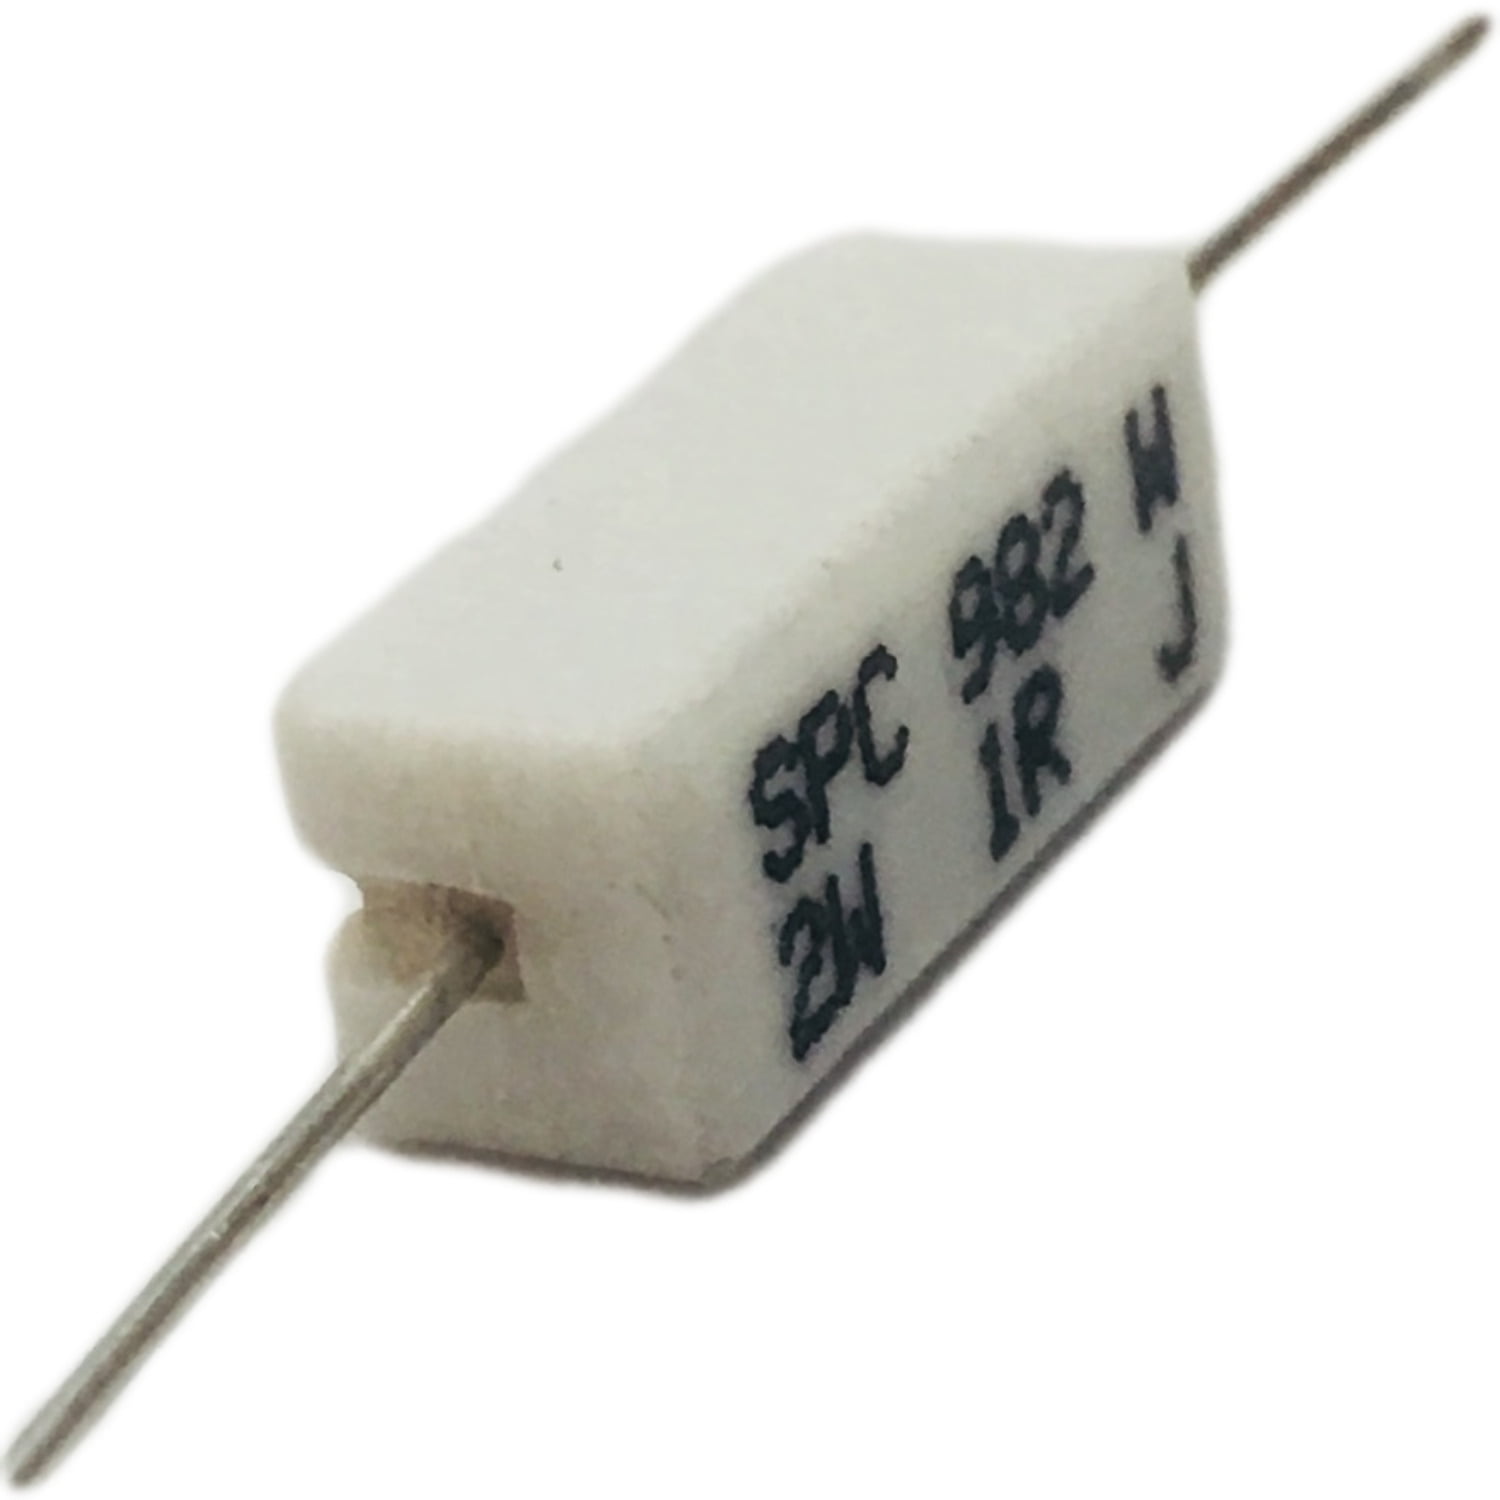 0.1uf 25v 10% X7R 1206 Size Surface Mount Capacitor 20 Pieces US Seller 